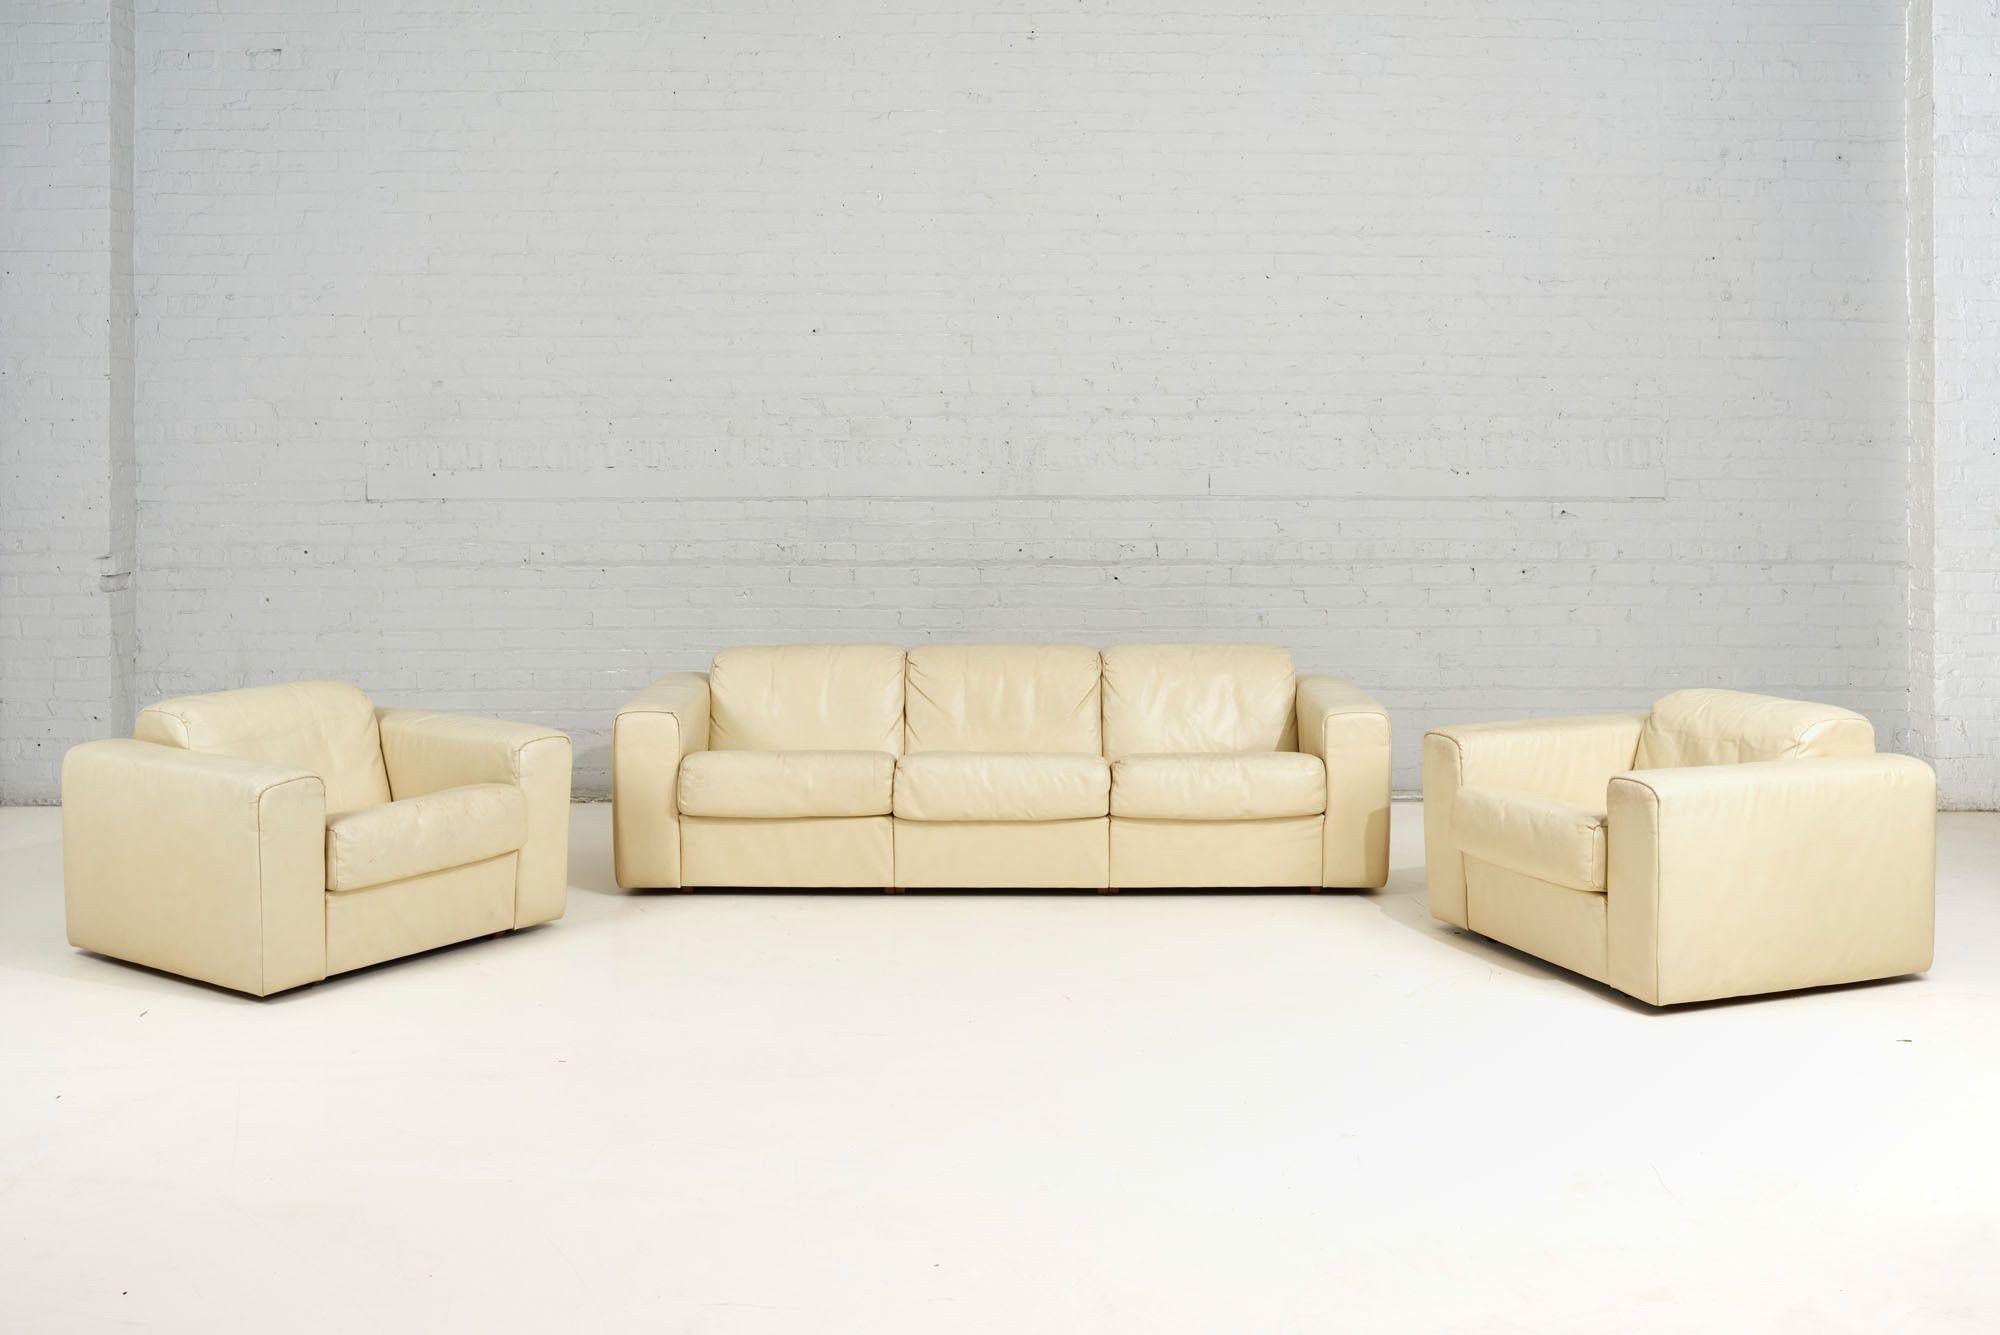 Baron Sofa by Robert Haussmann for Stendig, Cream Leather, 1970 For Sale 11